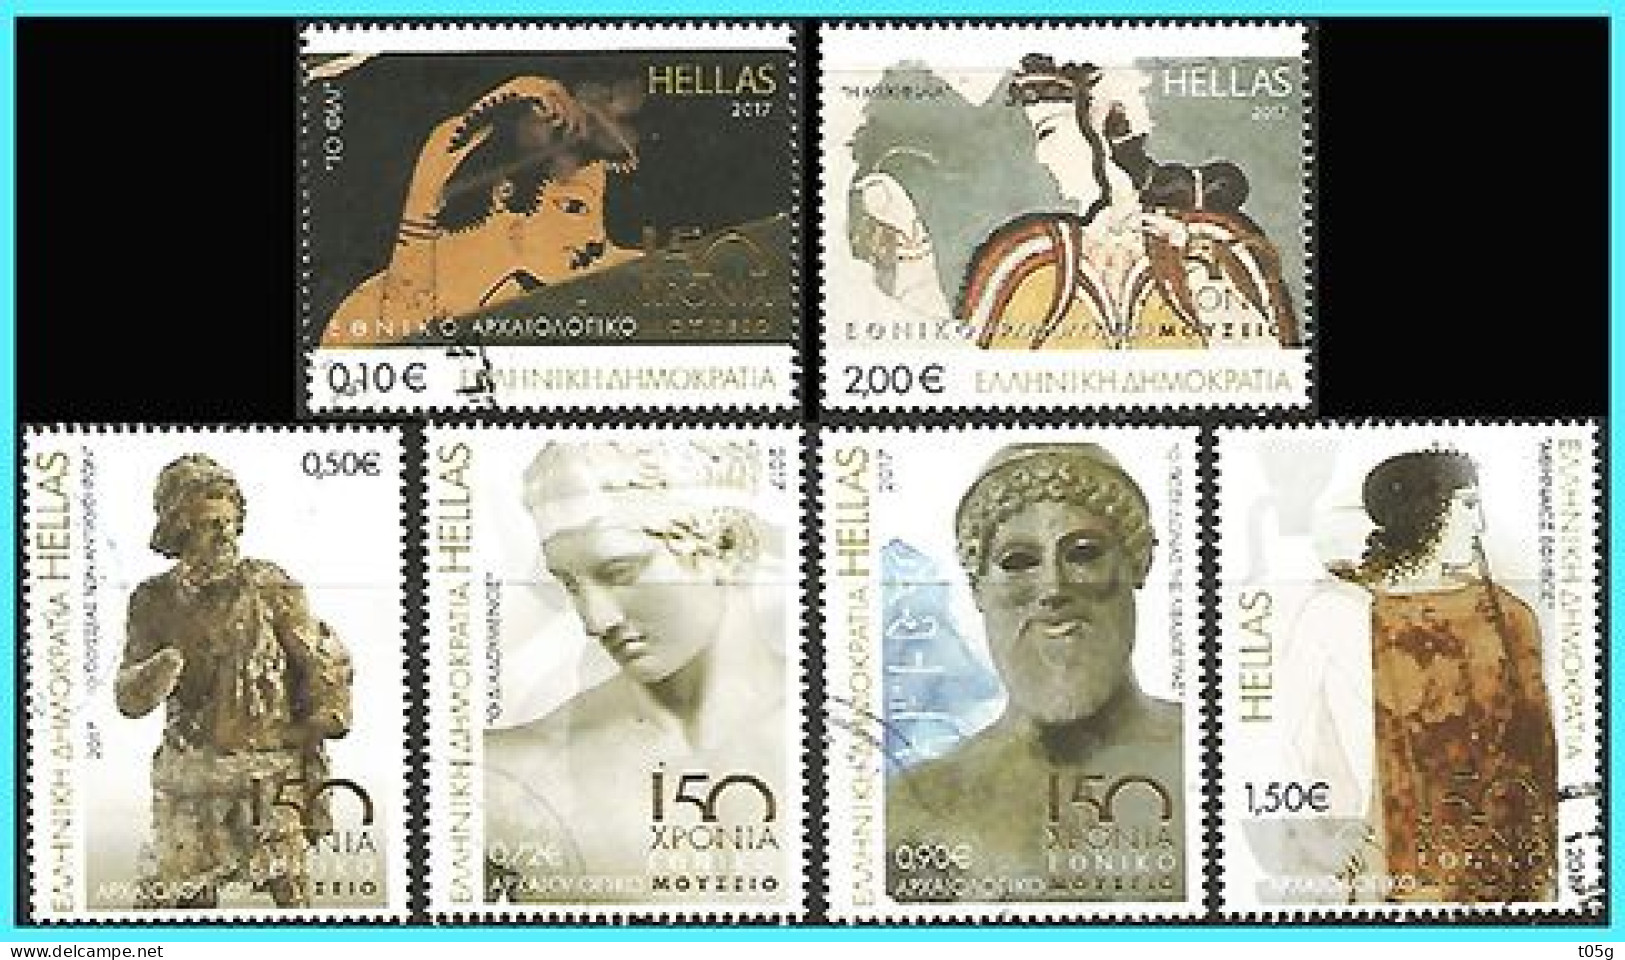 GREECE- GRECE - HELLAS 2015:  Compl Set Used - Used Stamps